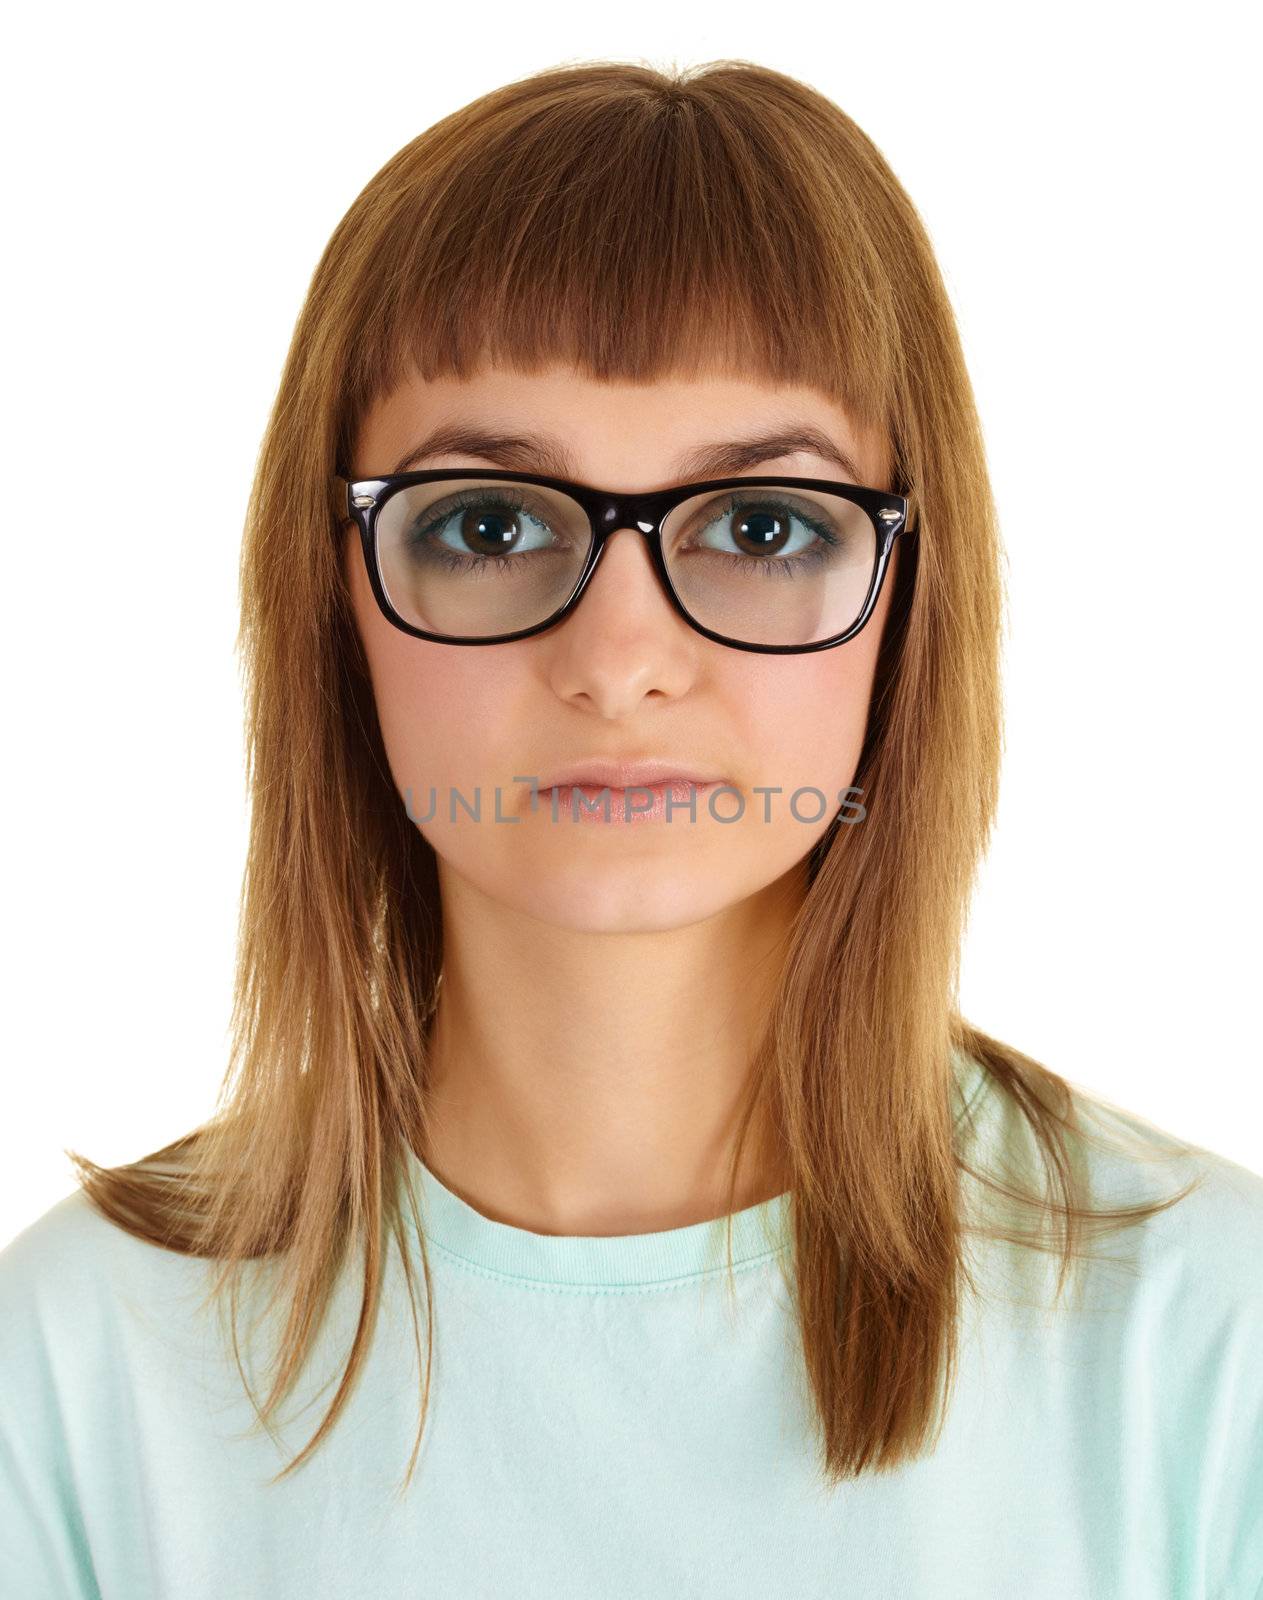 Funny girl - a teenager in very strong glasses